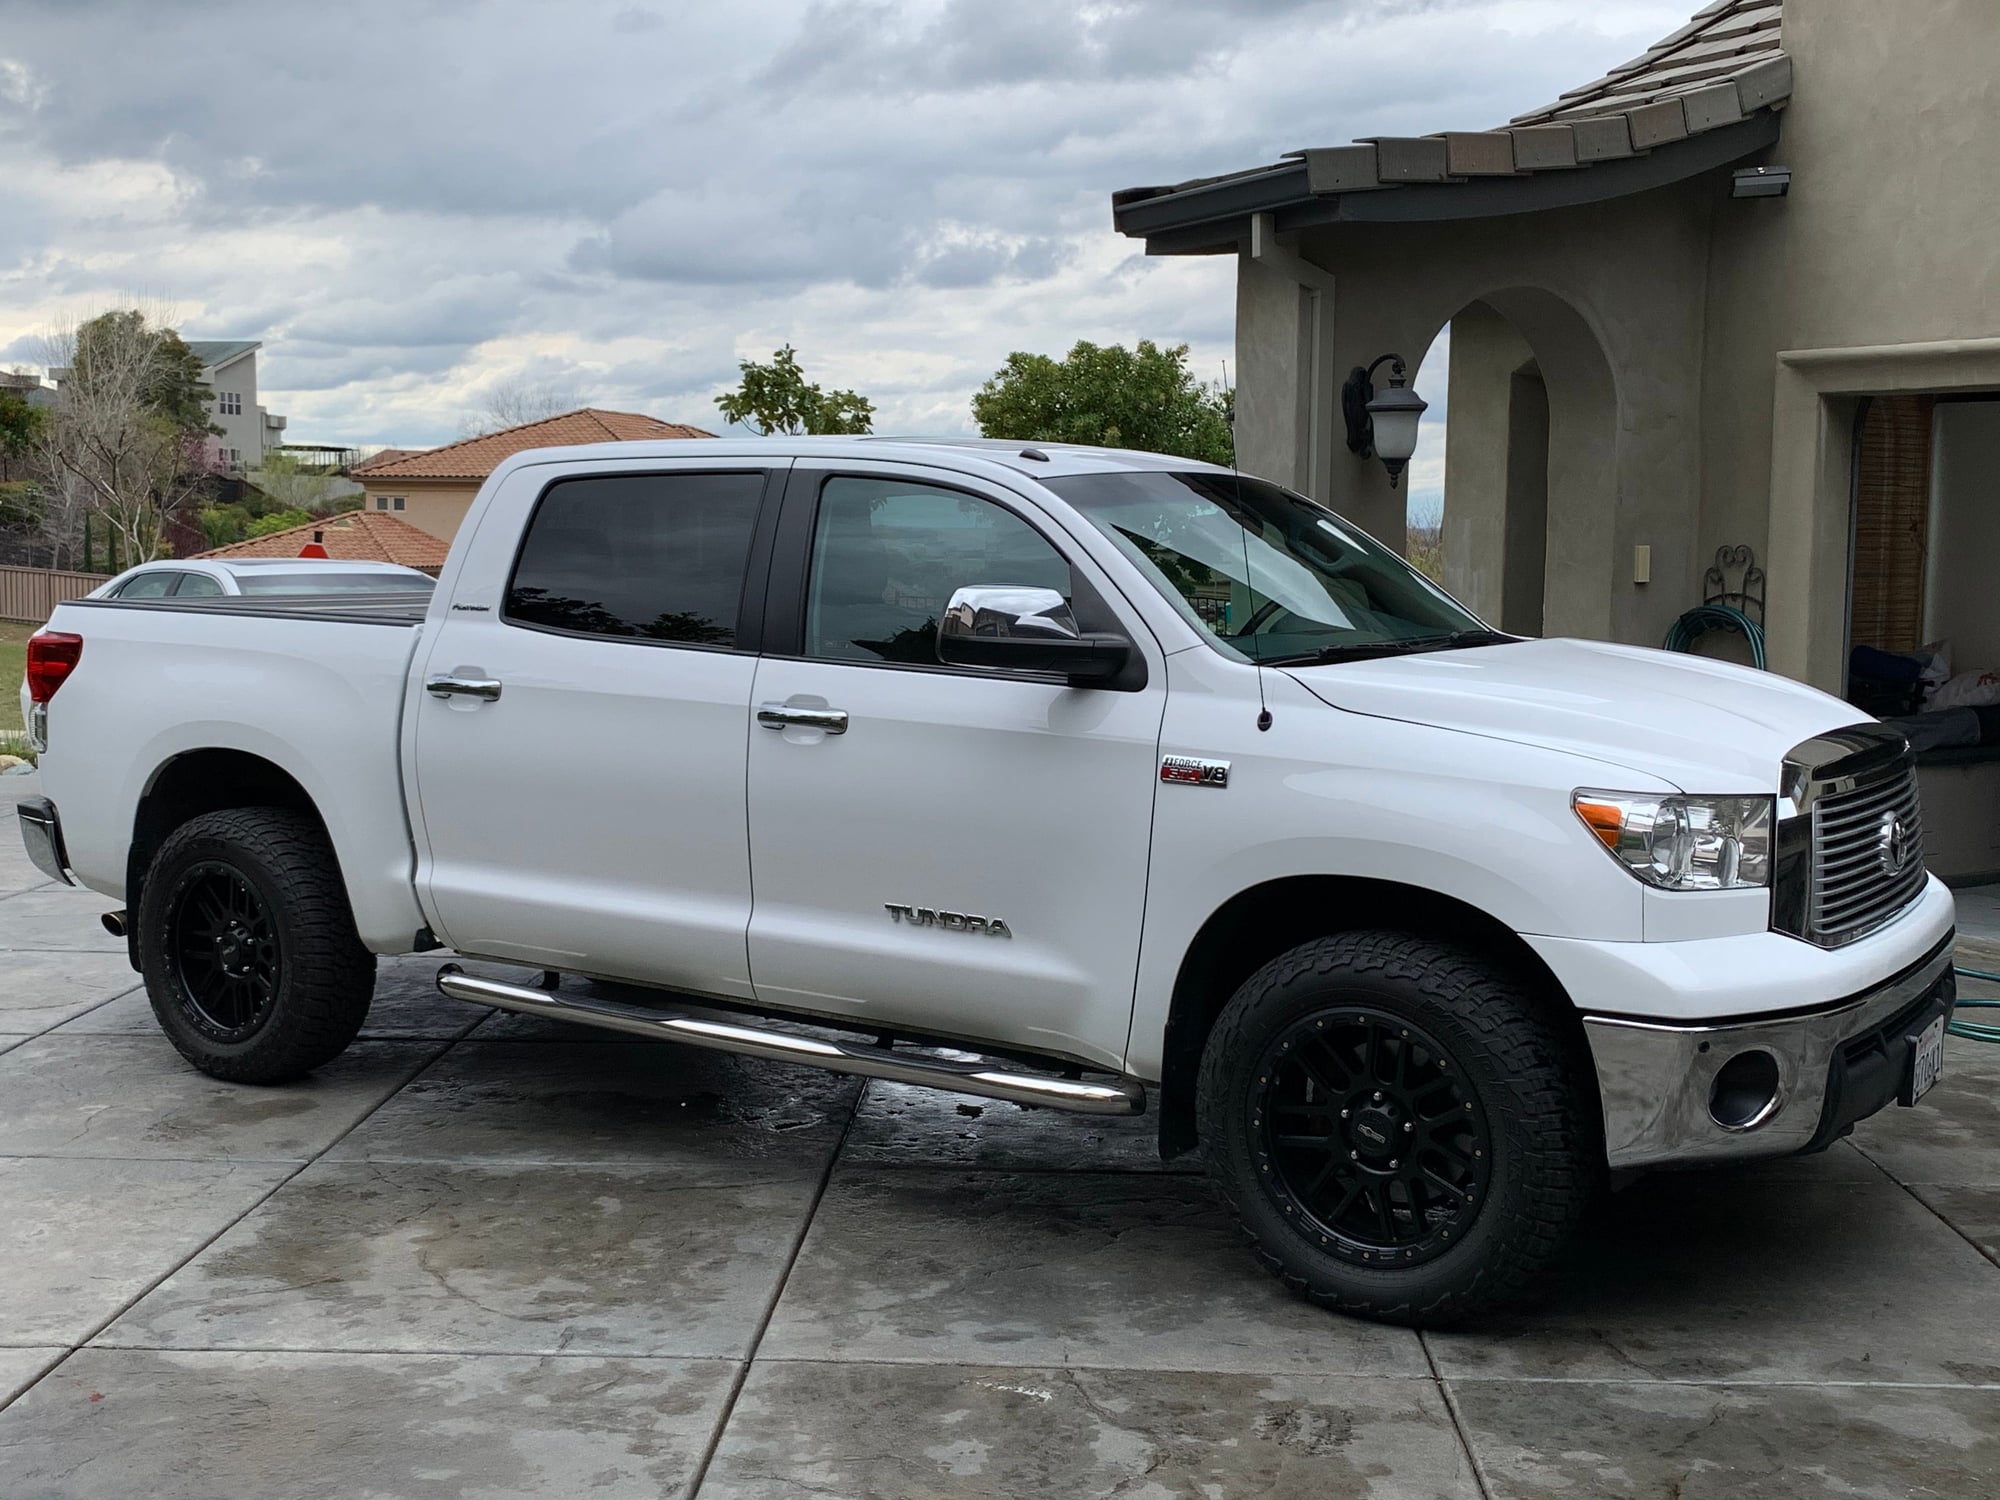 looking @ tundra & F-150 - Page 2 - Ford F150 Forum - Community of Ford